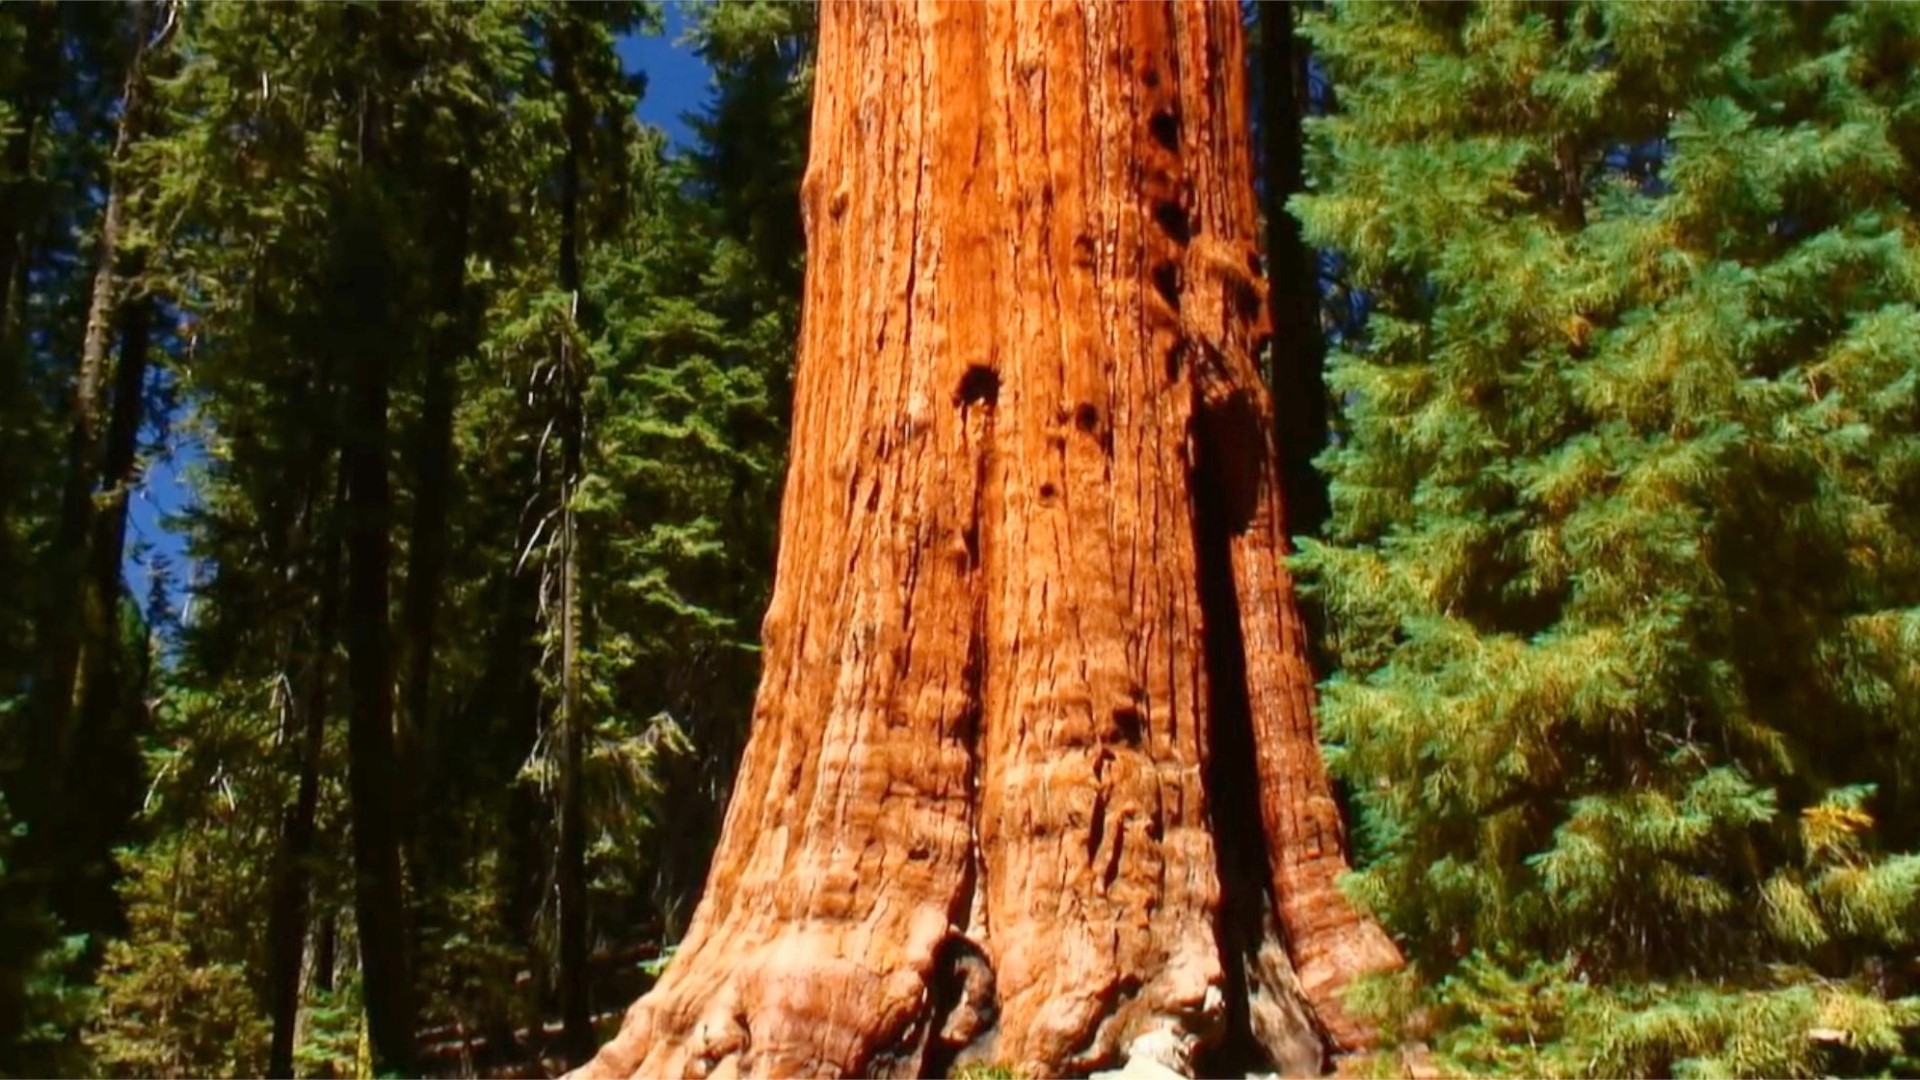 Giant sequoias are one of the world's greatest natural wonders, but they're under threat by climate change and wildfires. Veuer's Tony Spitz has the details.